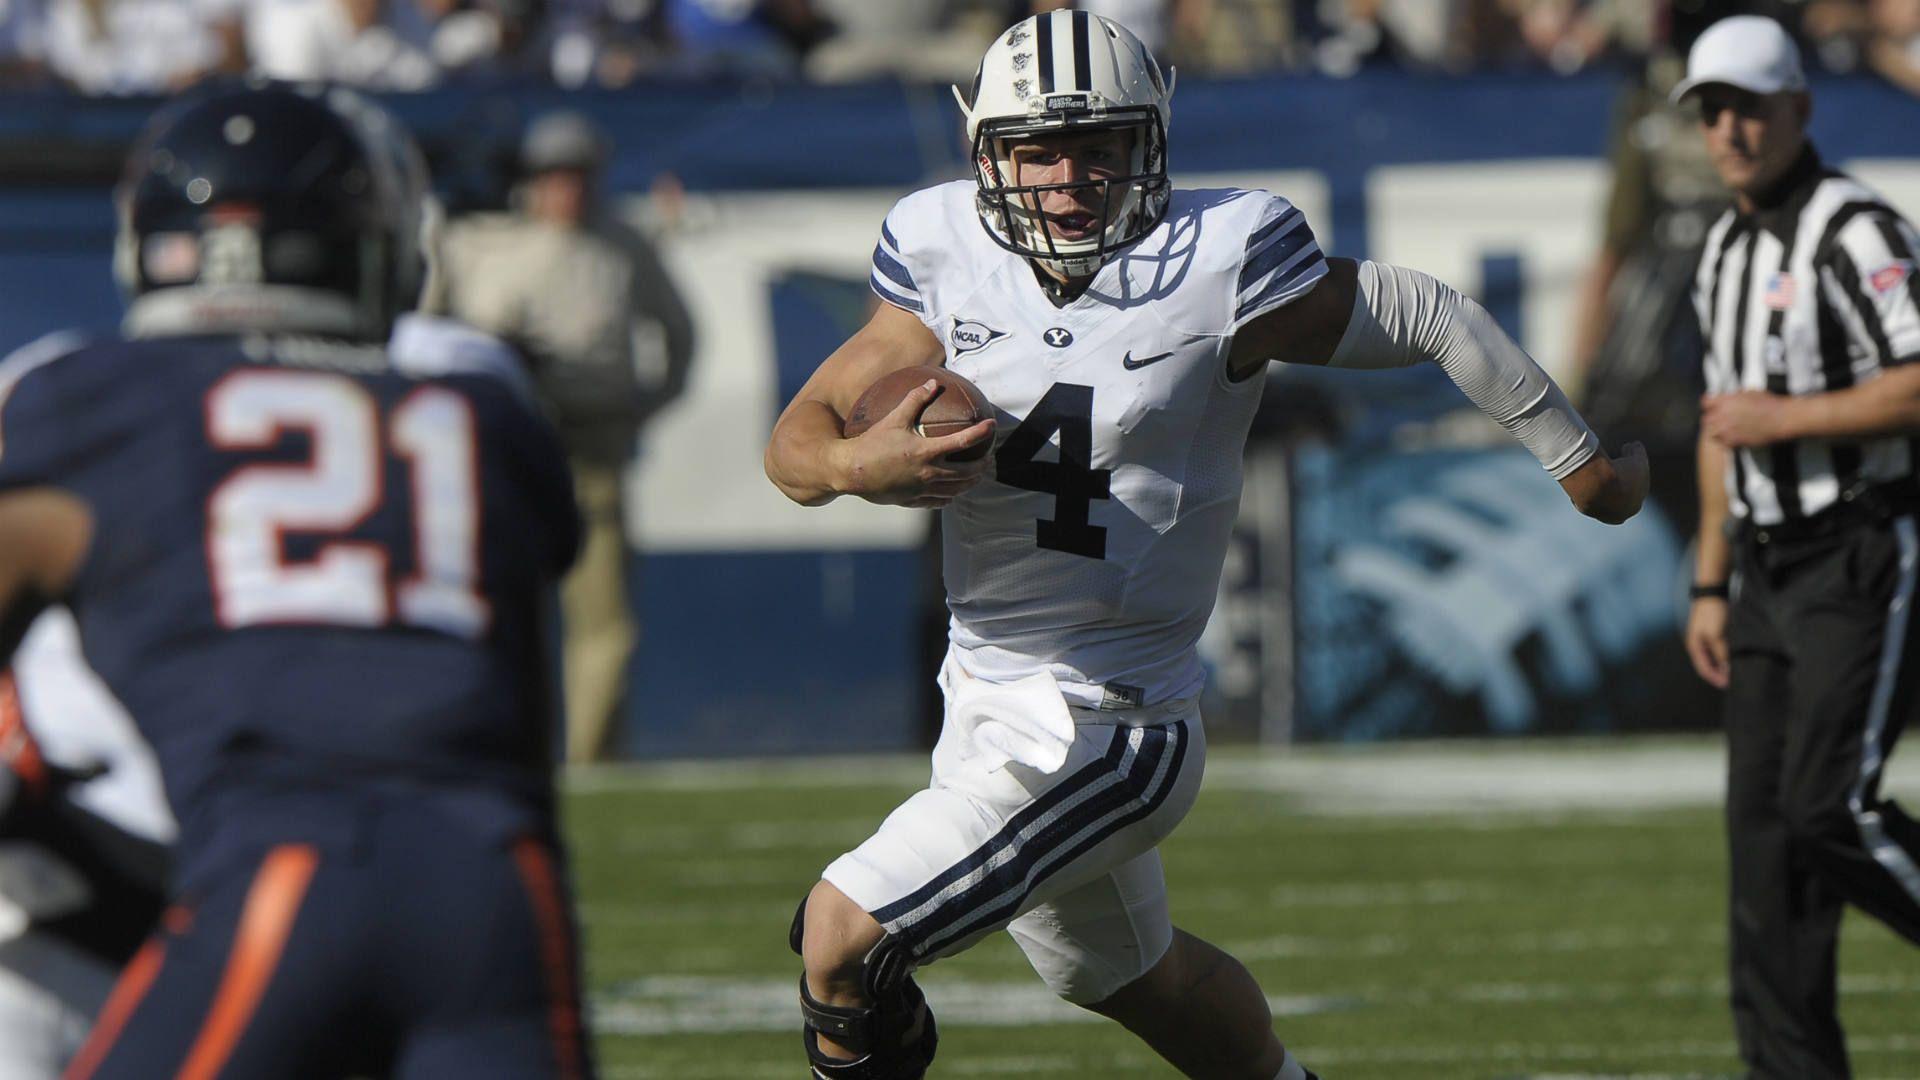 The BYU question: Unbeaten Cougars would push playoff debate. NCAA